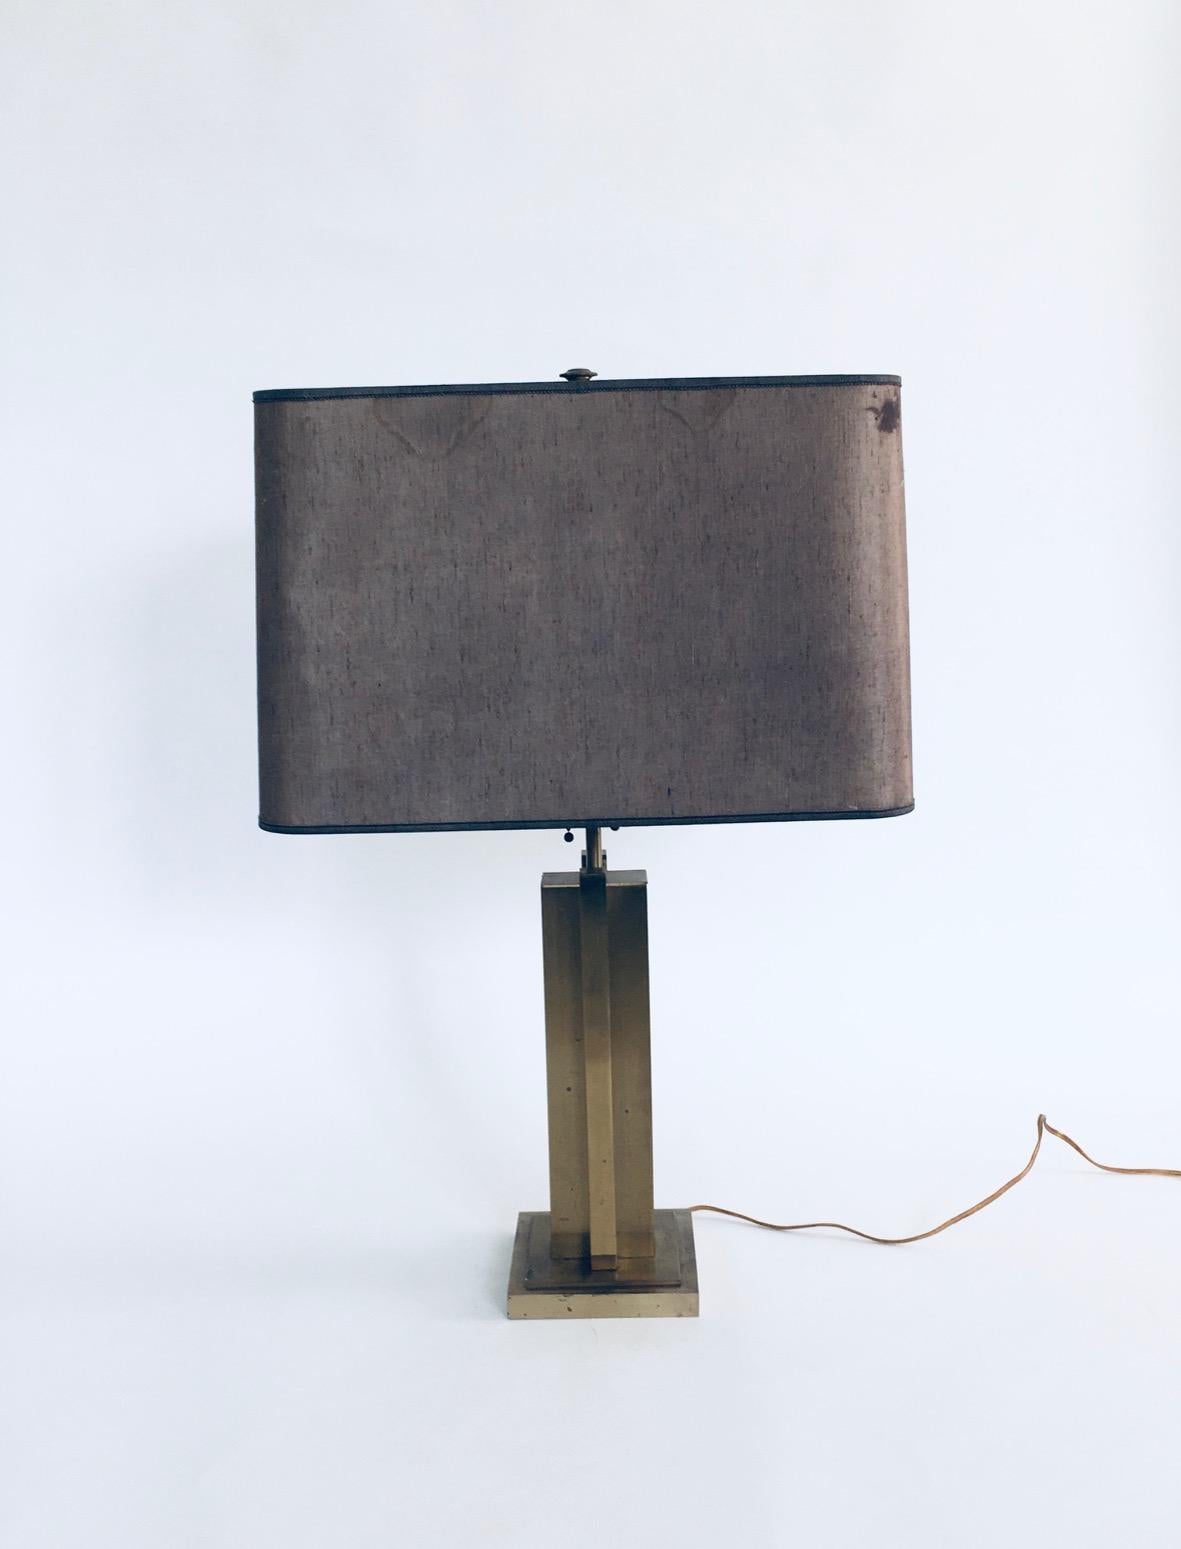 Vintage Postmodern Hollywood Regency Style Design Brass Architectural Table Lamp, made in the 1970's. All brass base with brown lampshade with gold inner finnish. 2 light points in the lamp. Some slight spotting on brass base. The original lampshade